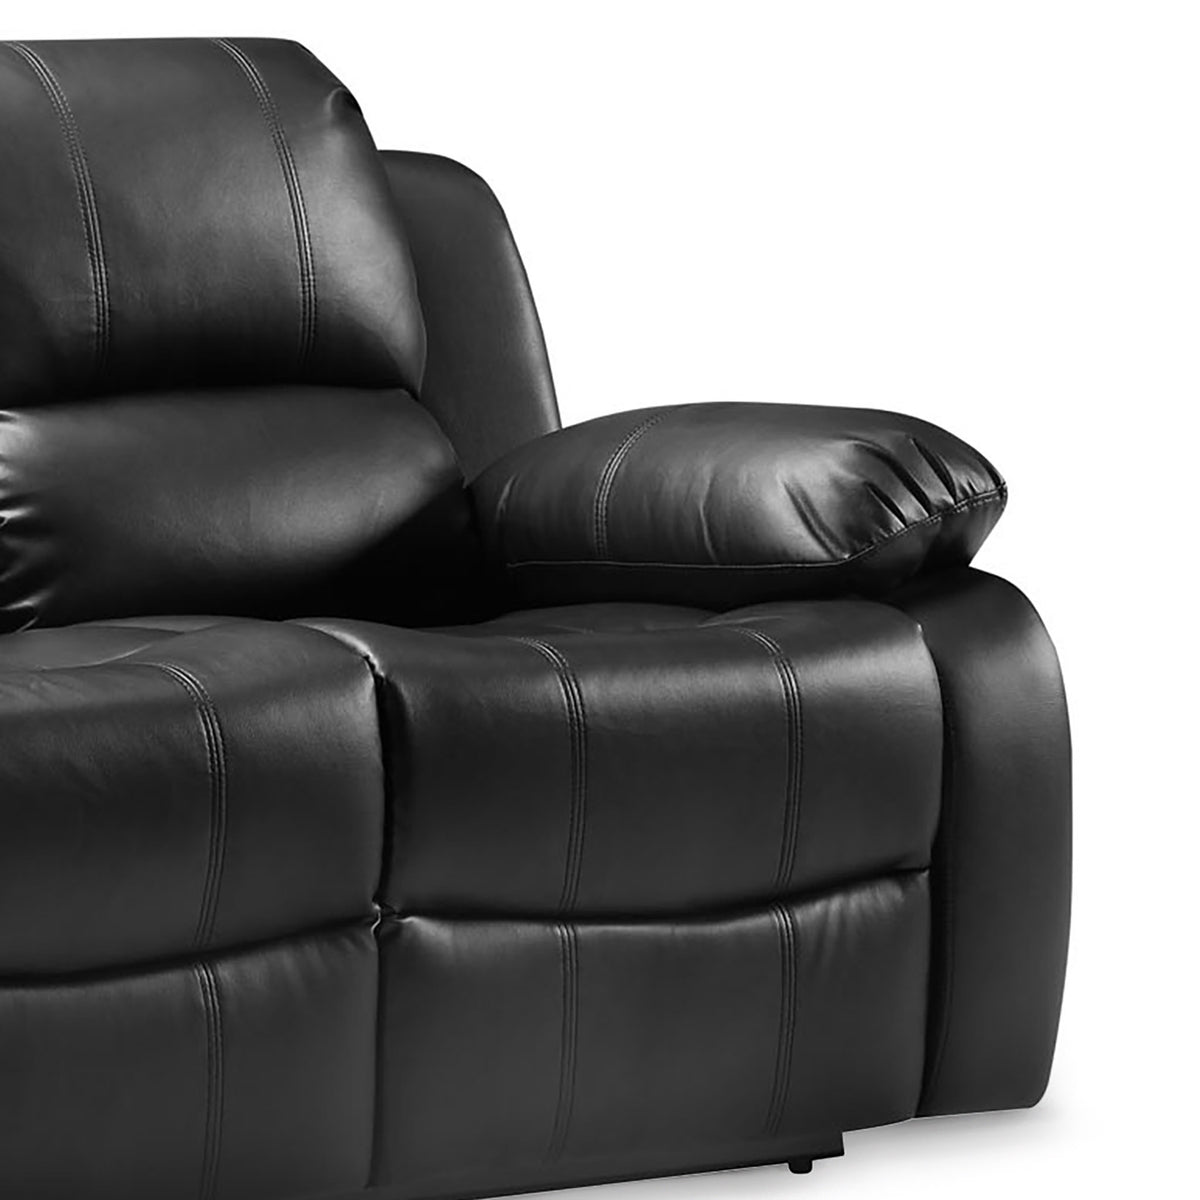 Valencia Black 3 Seater Reclining Air Leather Sofa - Close up of arm